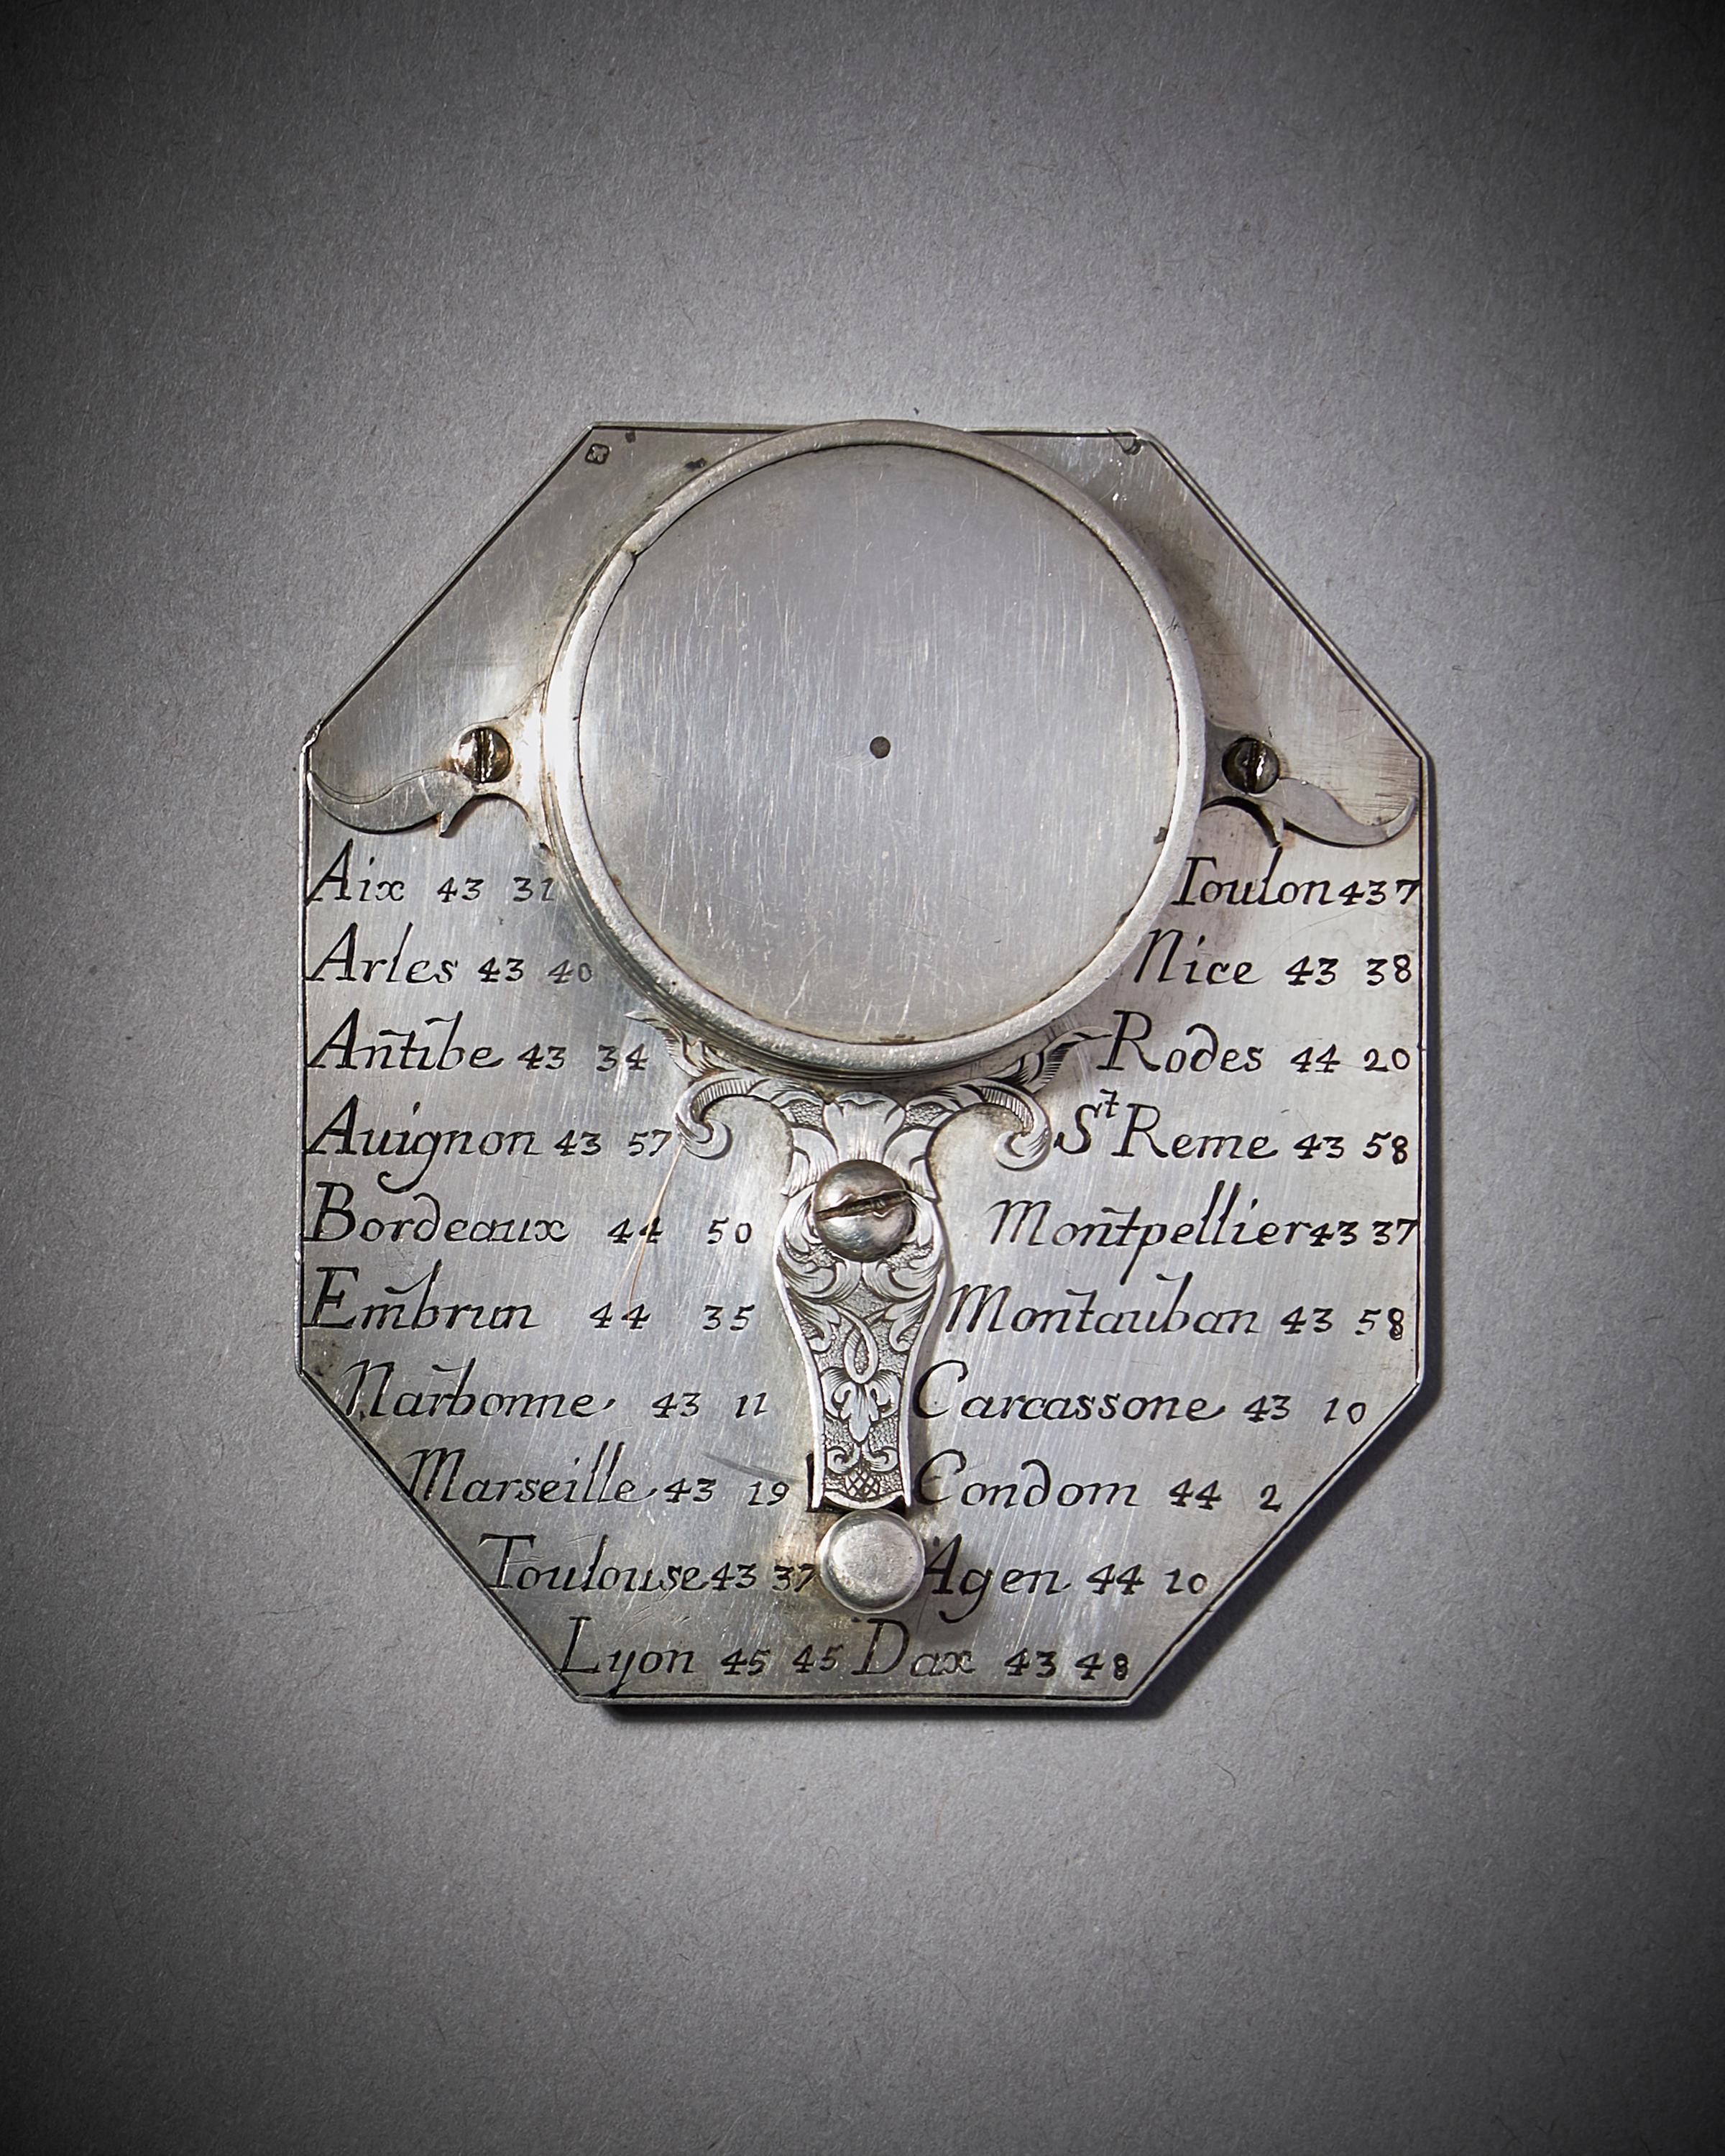 A beautiful, rare solid silver Anglo-French octagonal pocket sundial with compass by Michael Butterfield, circa 1700.

The sundial is made for a latitude of 44° and could be used in places in the south of France such as Avignon and elsewhere along